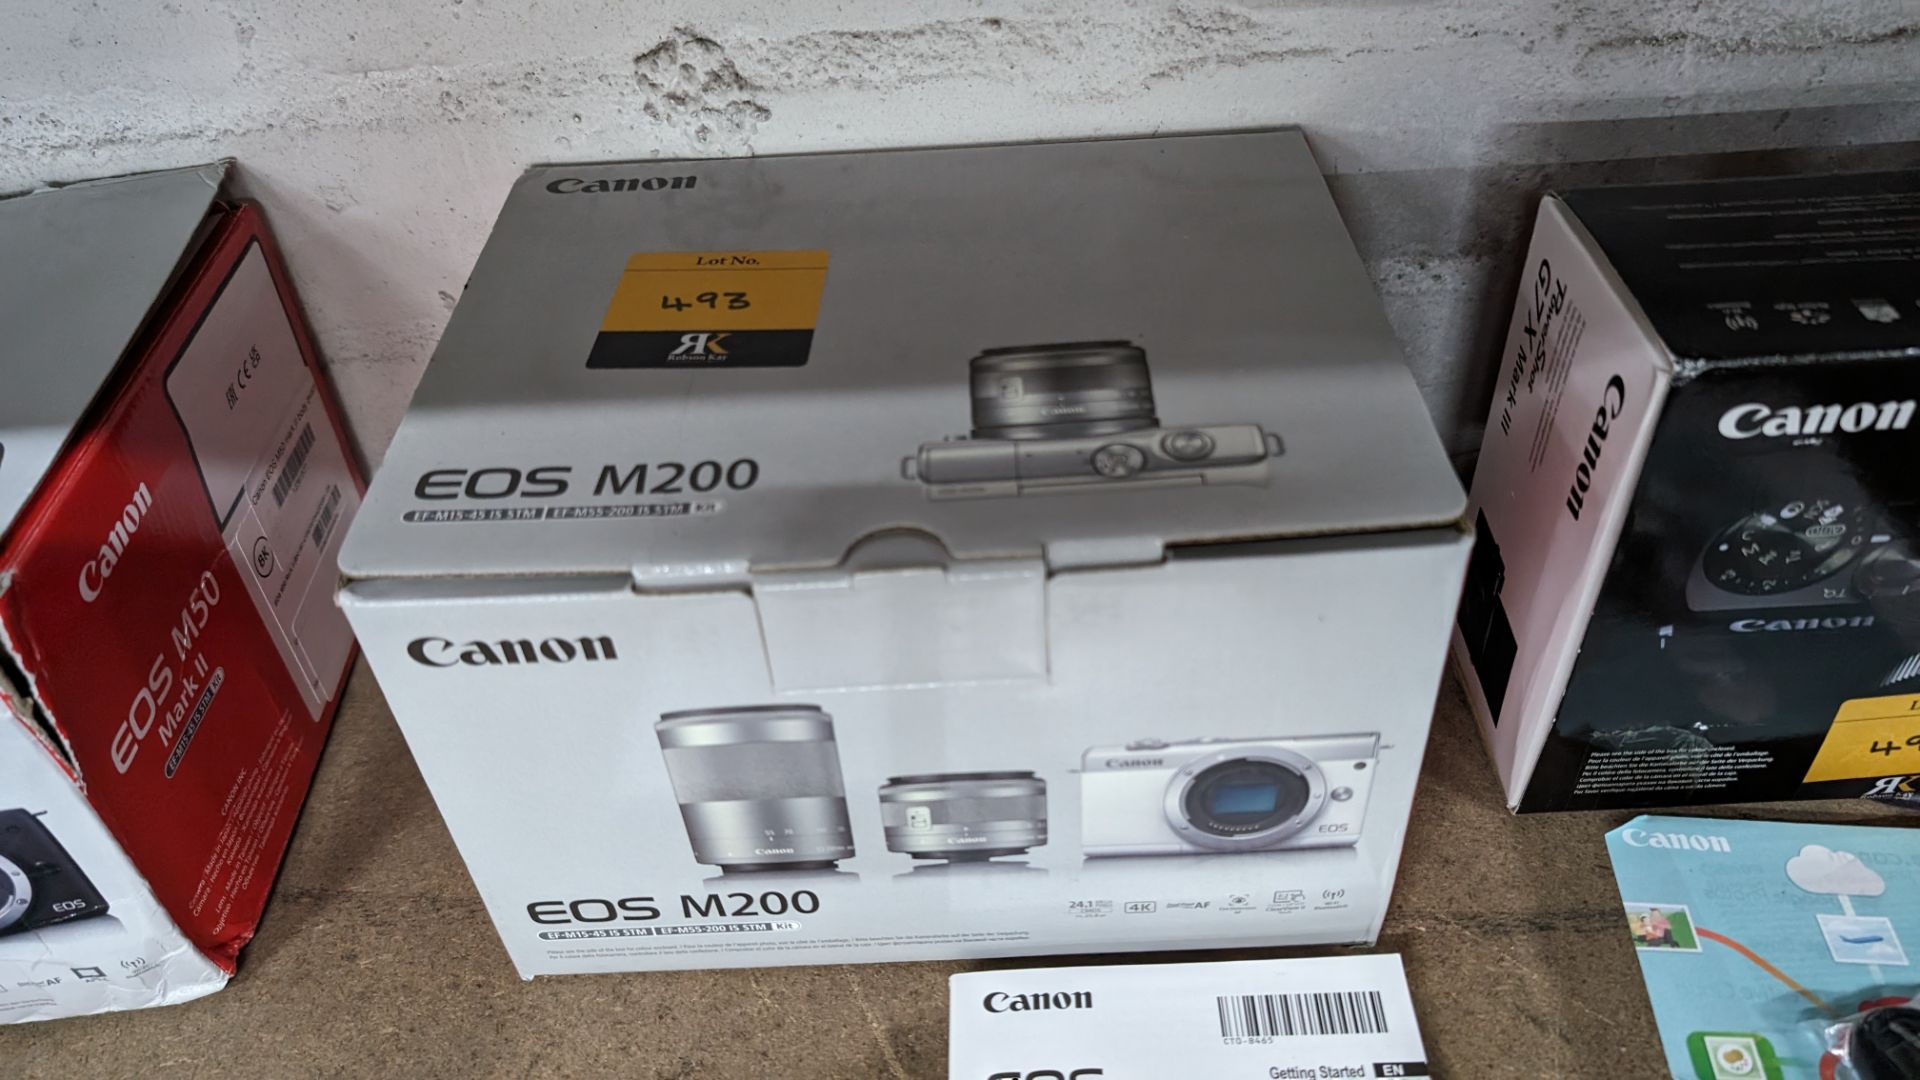 Canon EOS M200 camera kit, including 15-45mm image stabilizer lens, plus battery and charger - Image 12 of 12